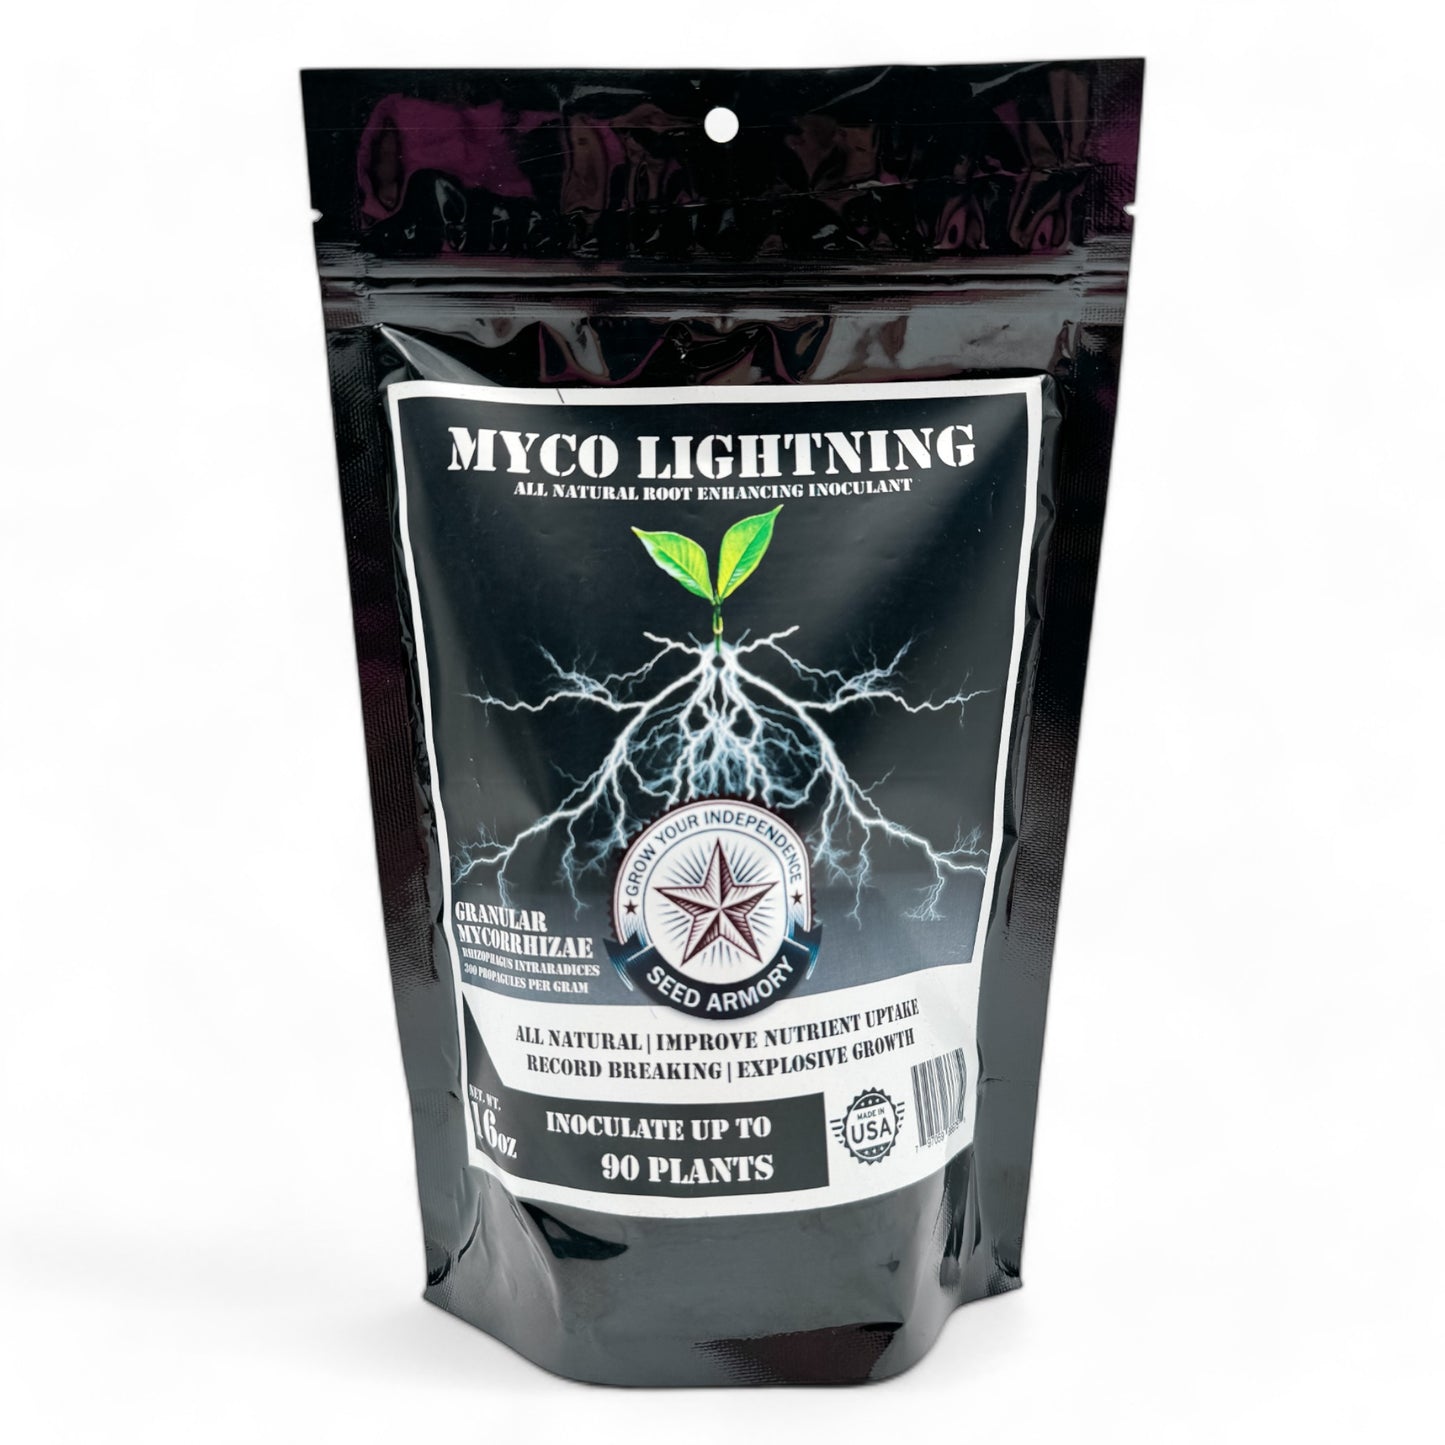 Front package of Myco Lightning plant nutrients pest repellent with branded label